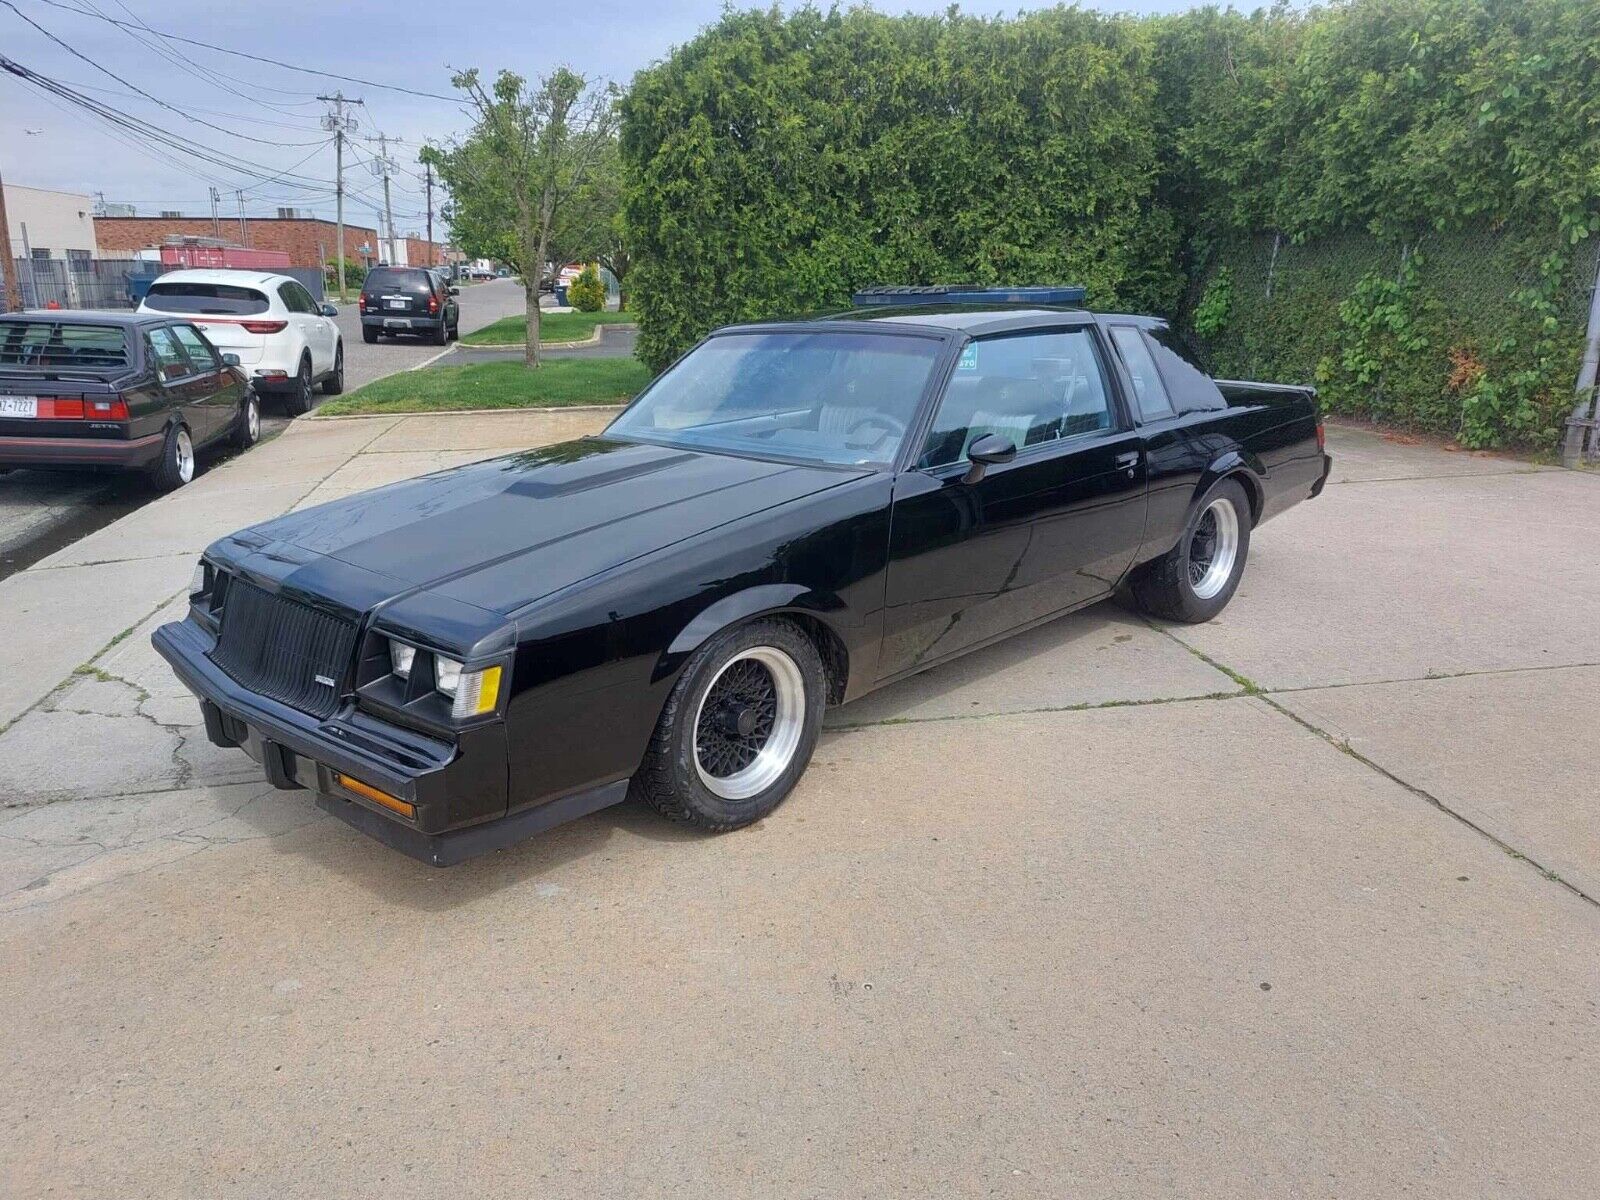 Buick Grand National Coupe 1987 à vendre